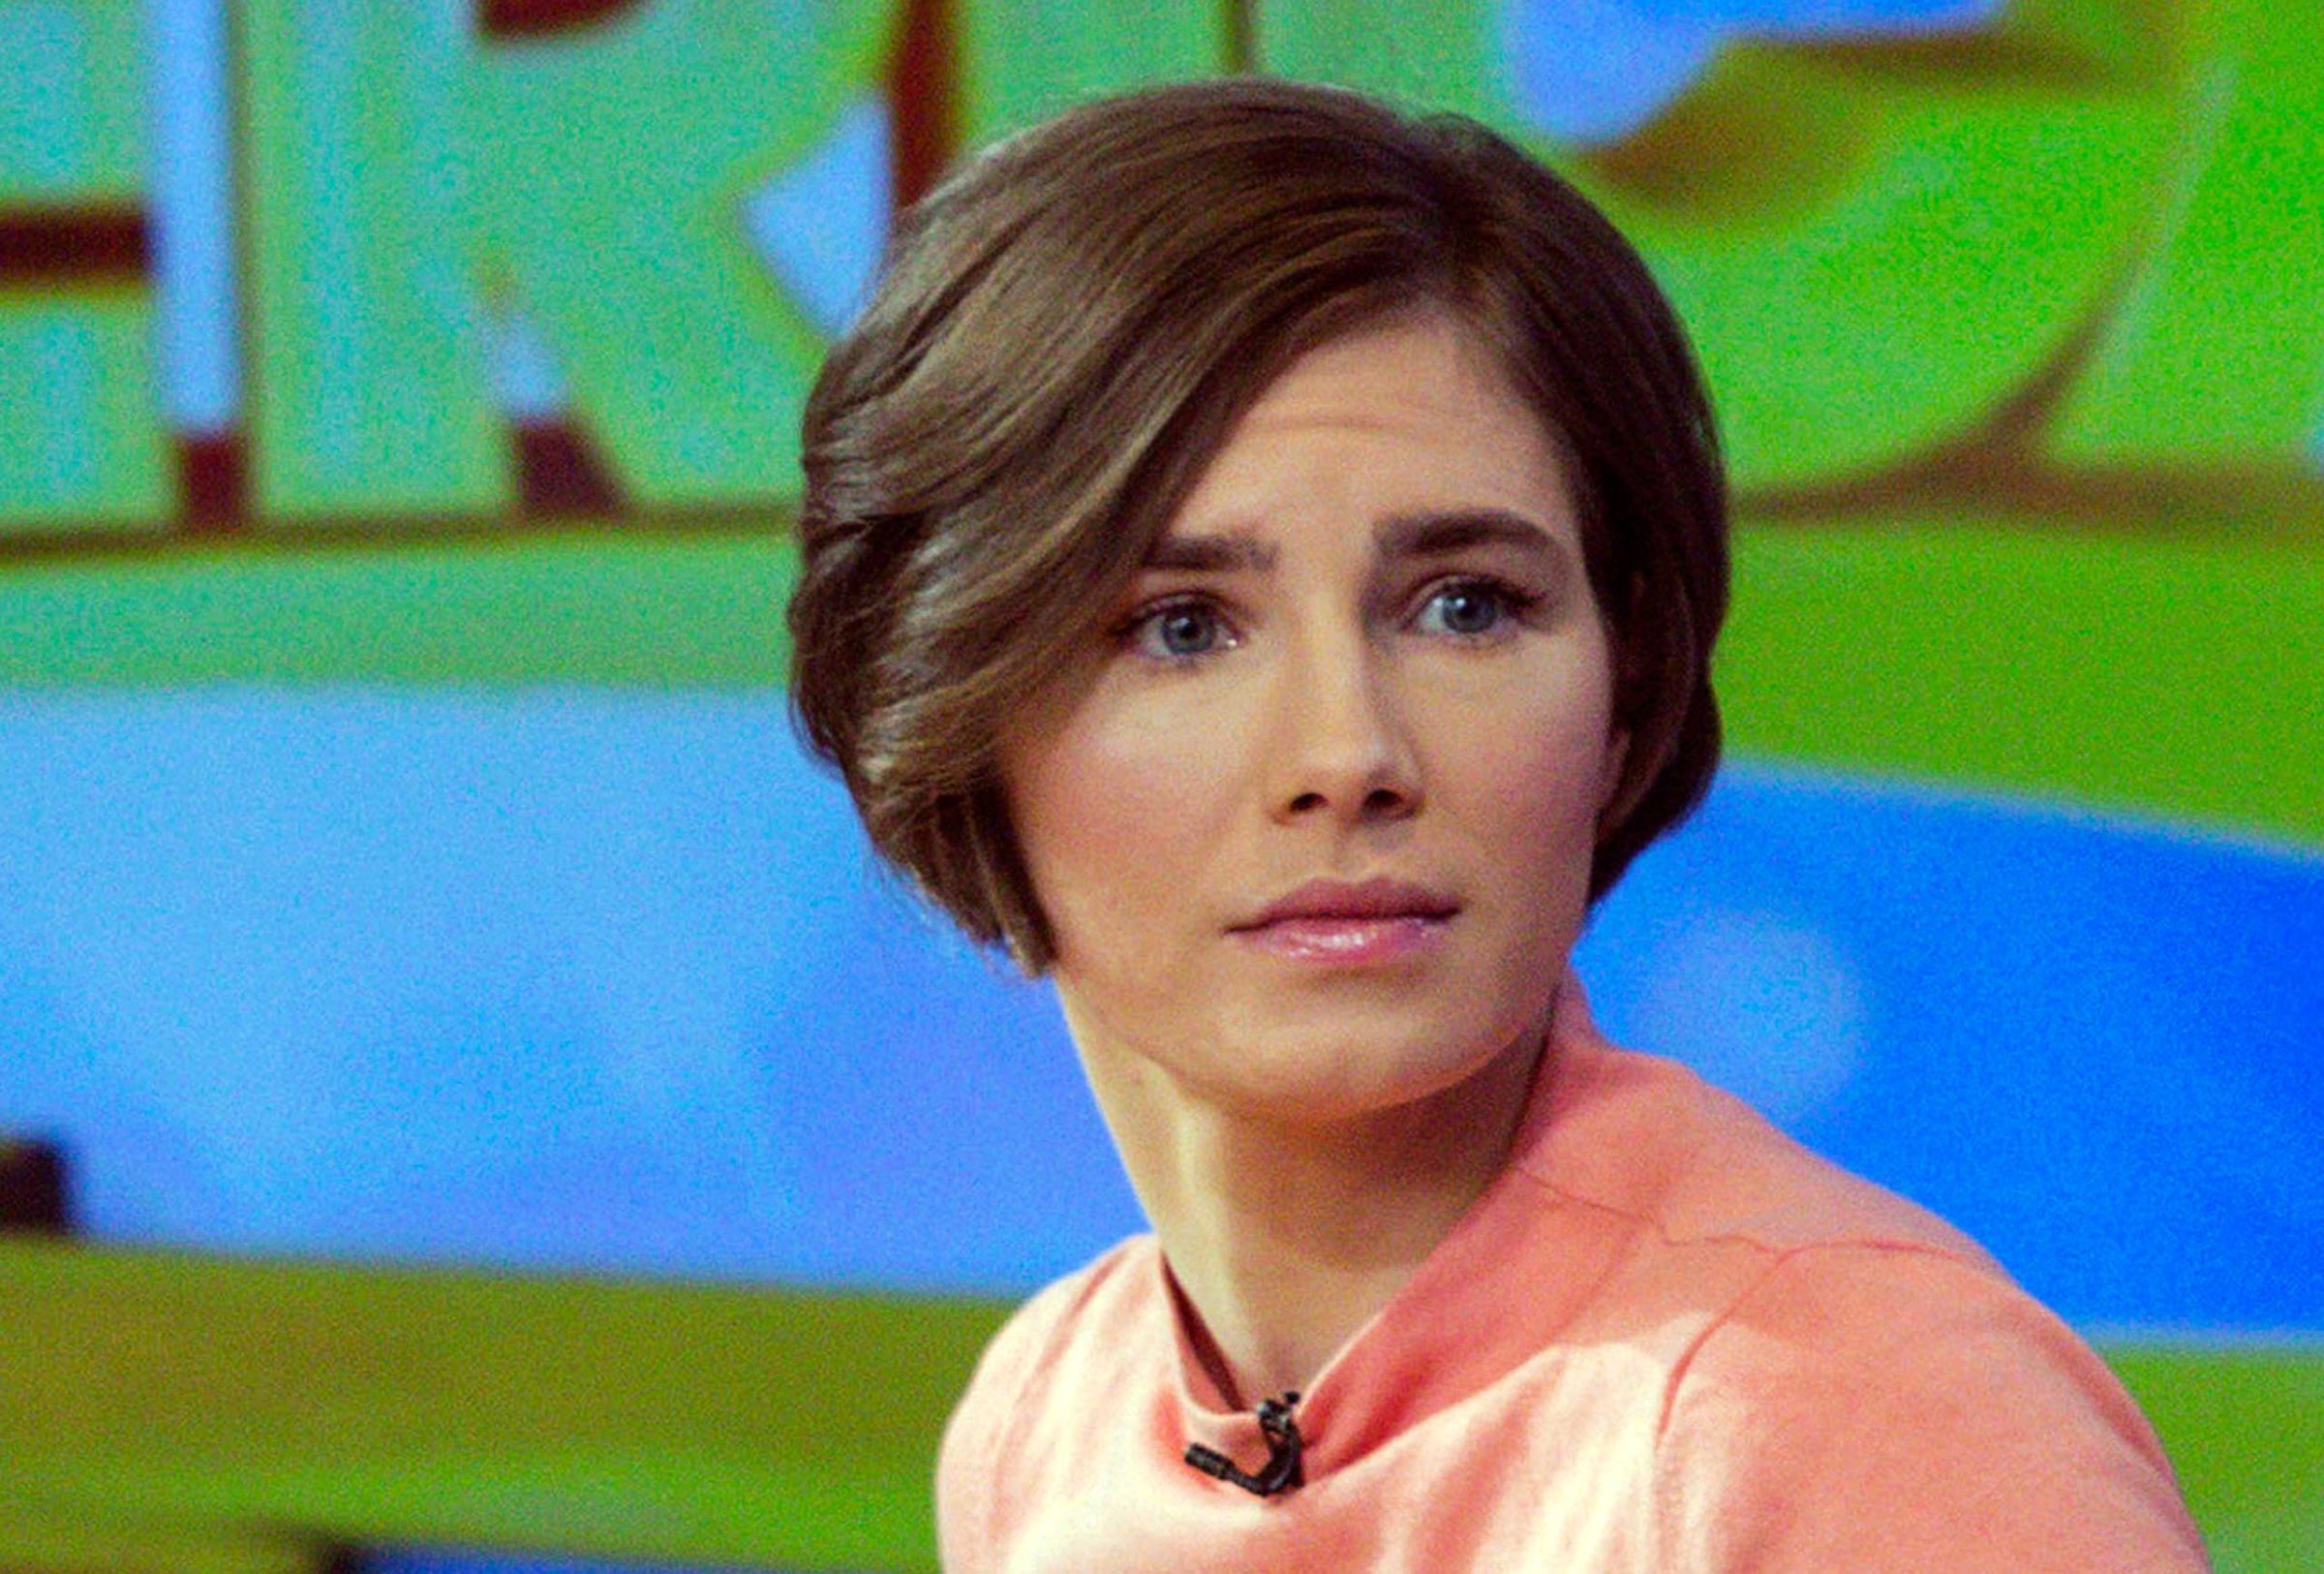 Amanda Knox reacts while being interviewed on the set of ABC's "Good Morning America" in New York in this January 31, 2014 file photo.